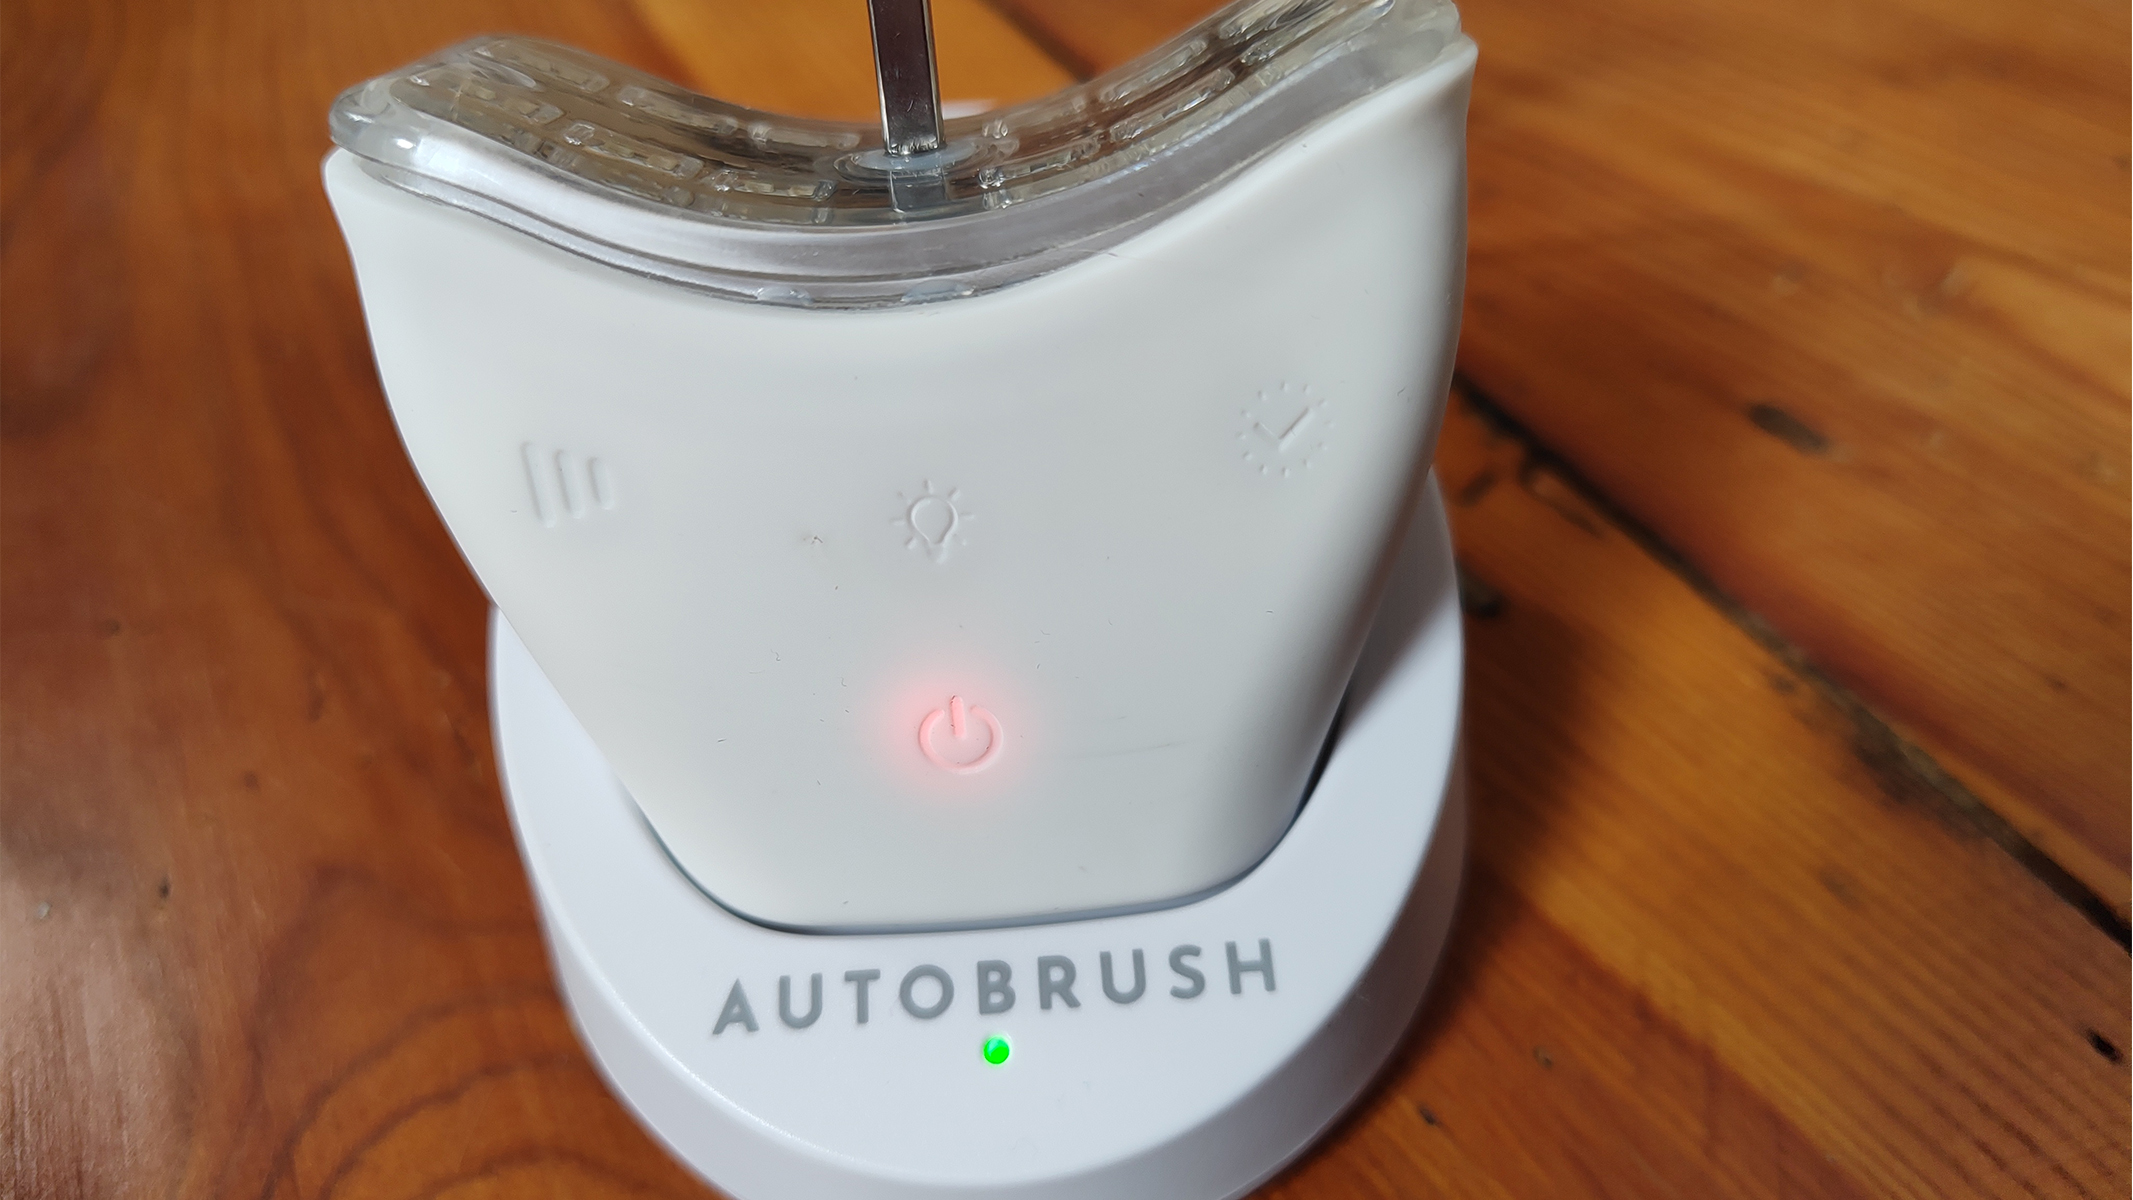 The AutoBrush Sonic Pro in its charging dock.